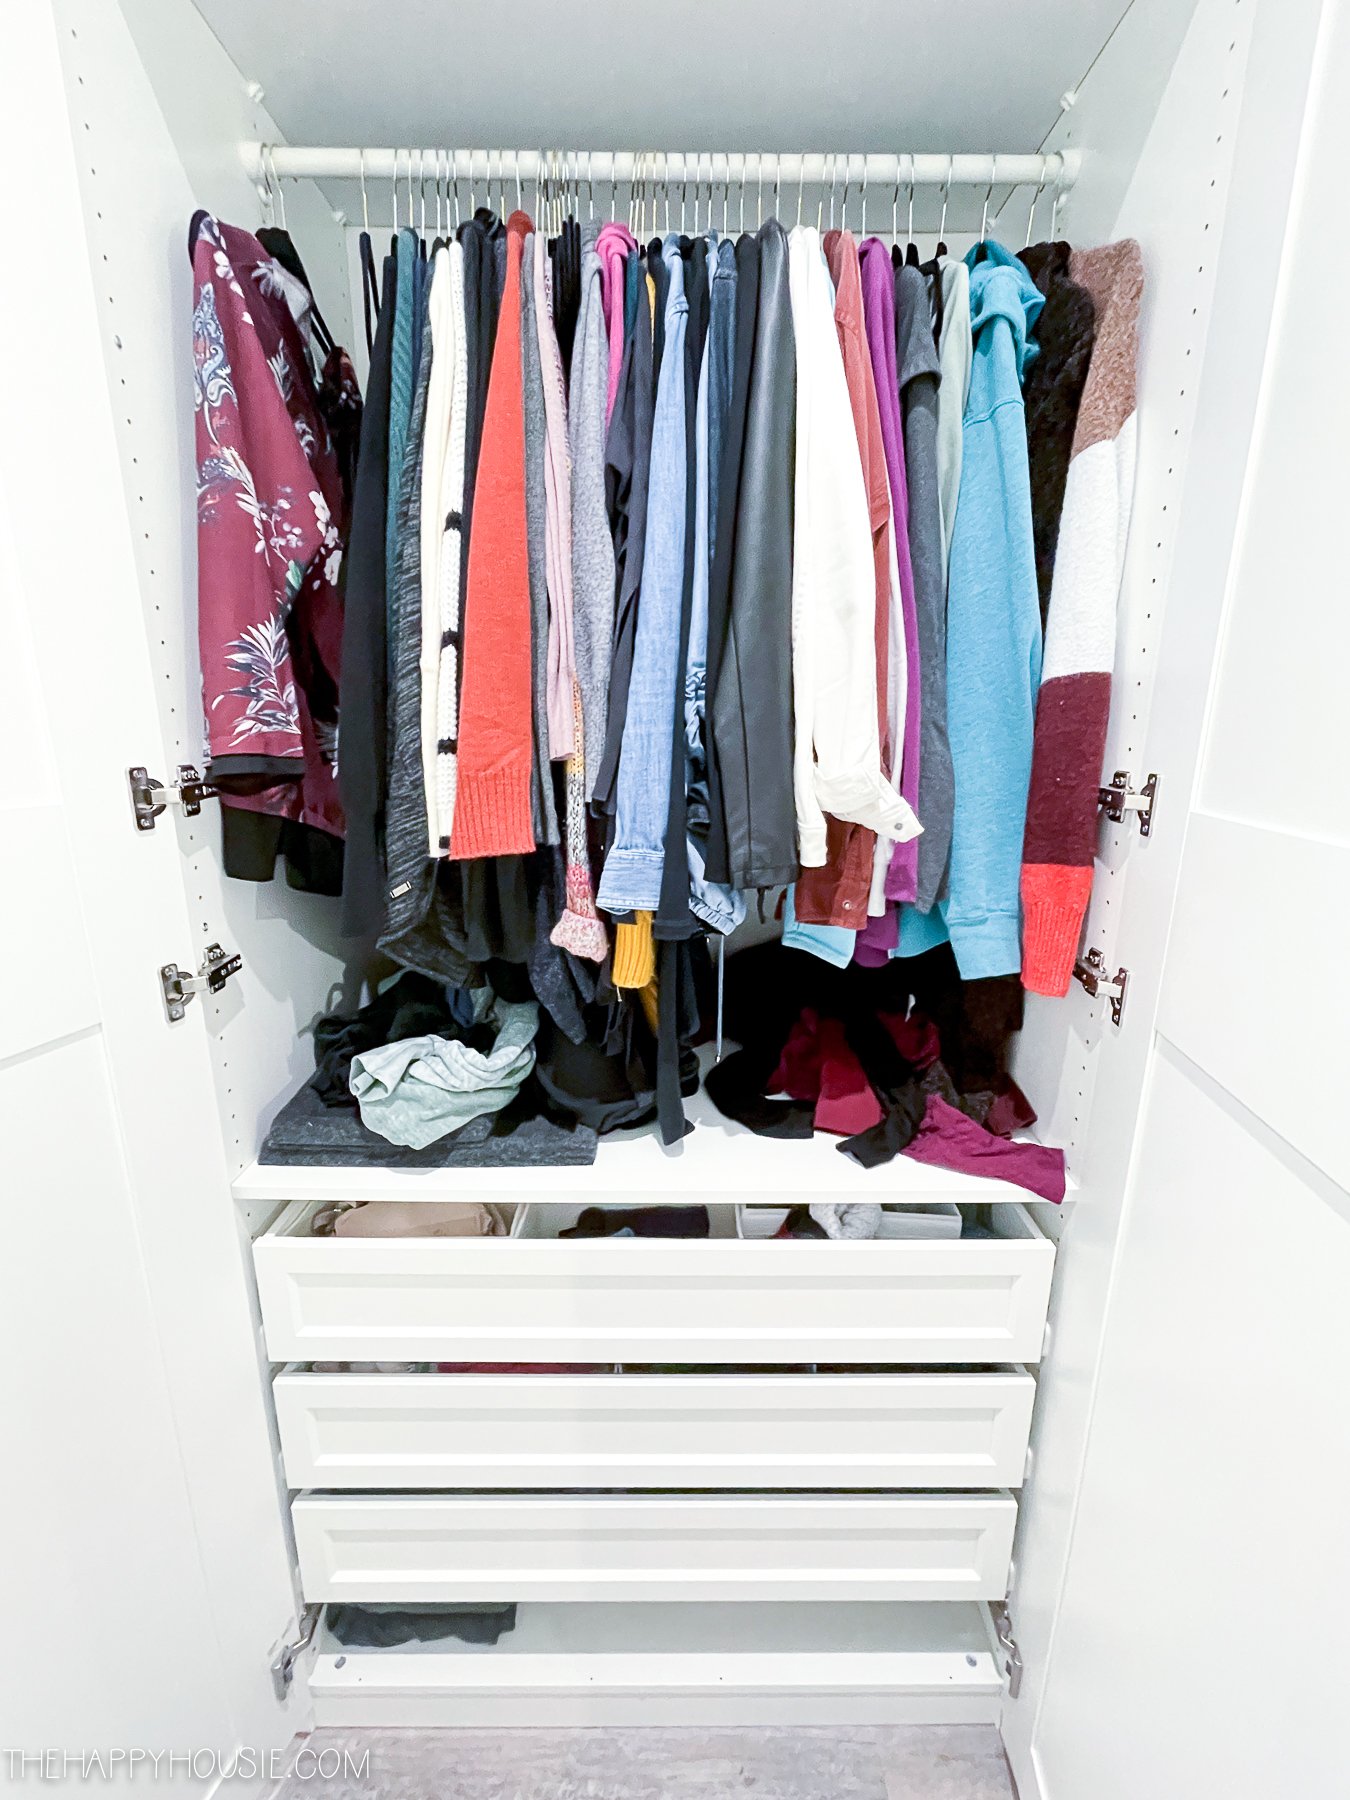 clothings in a disorganized bedroom closet